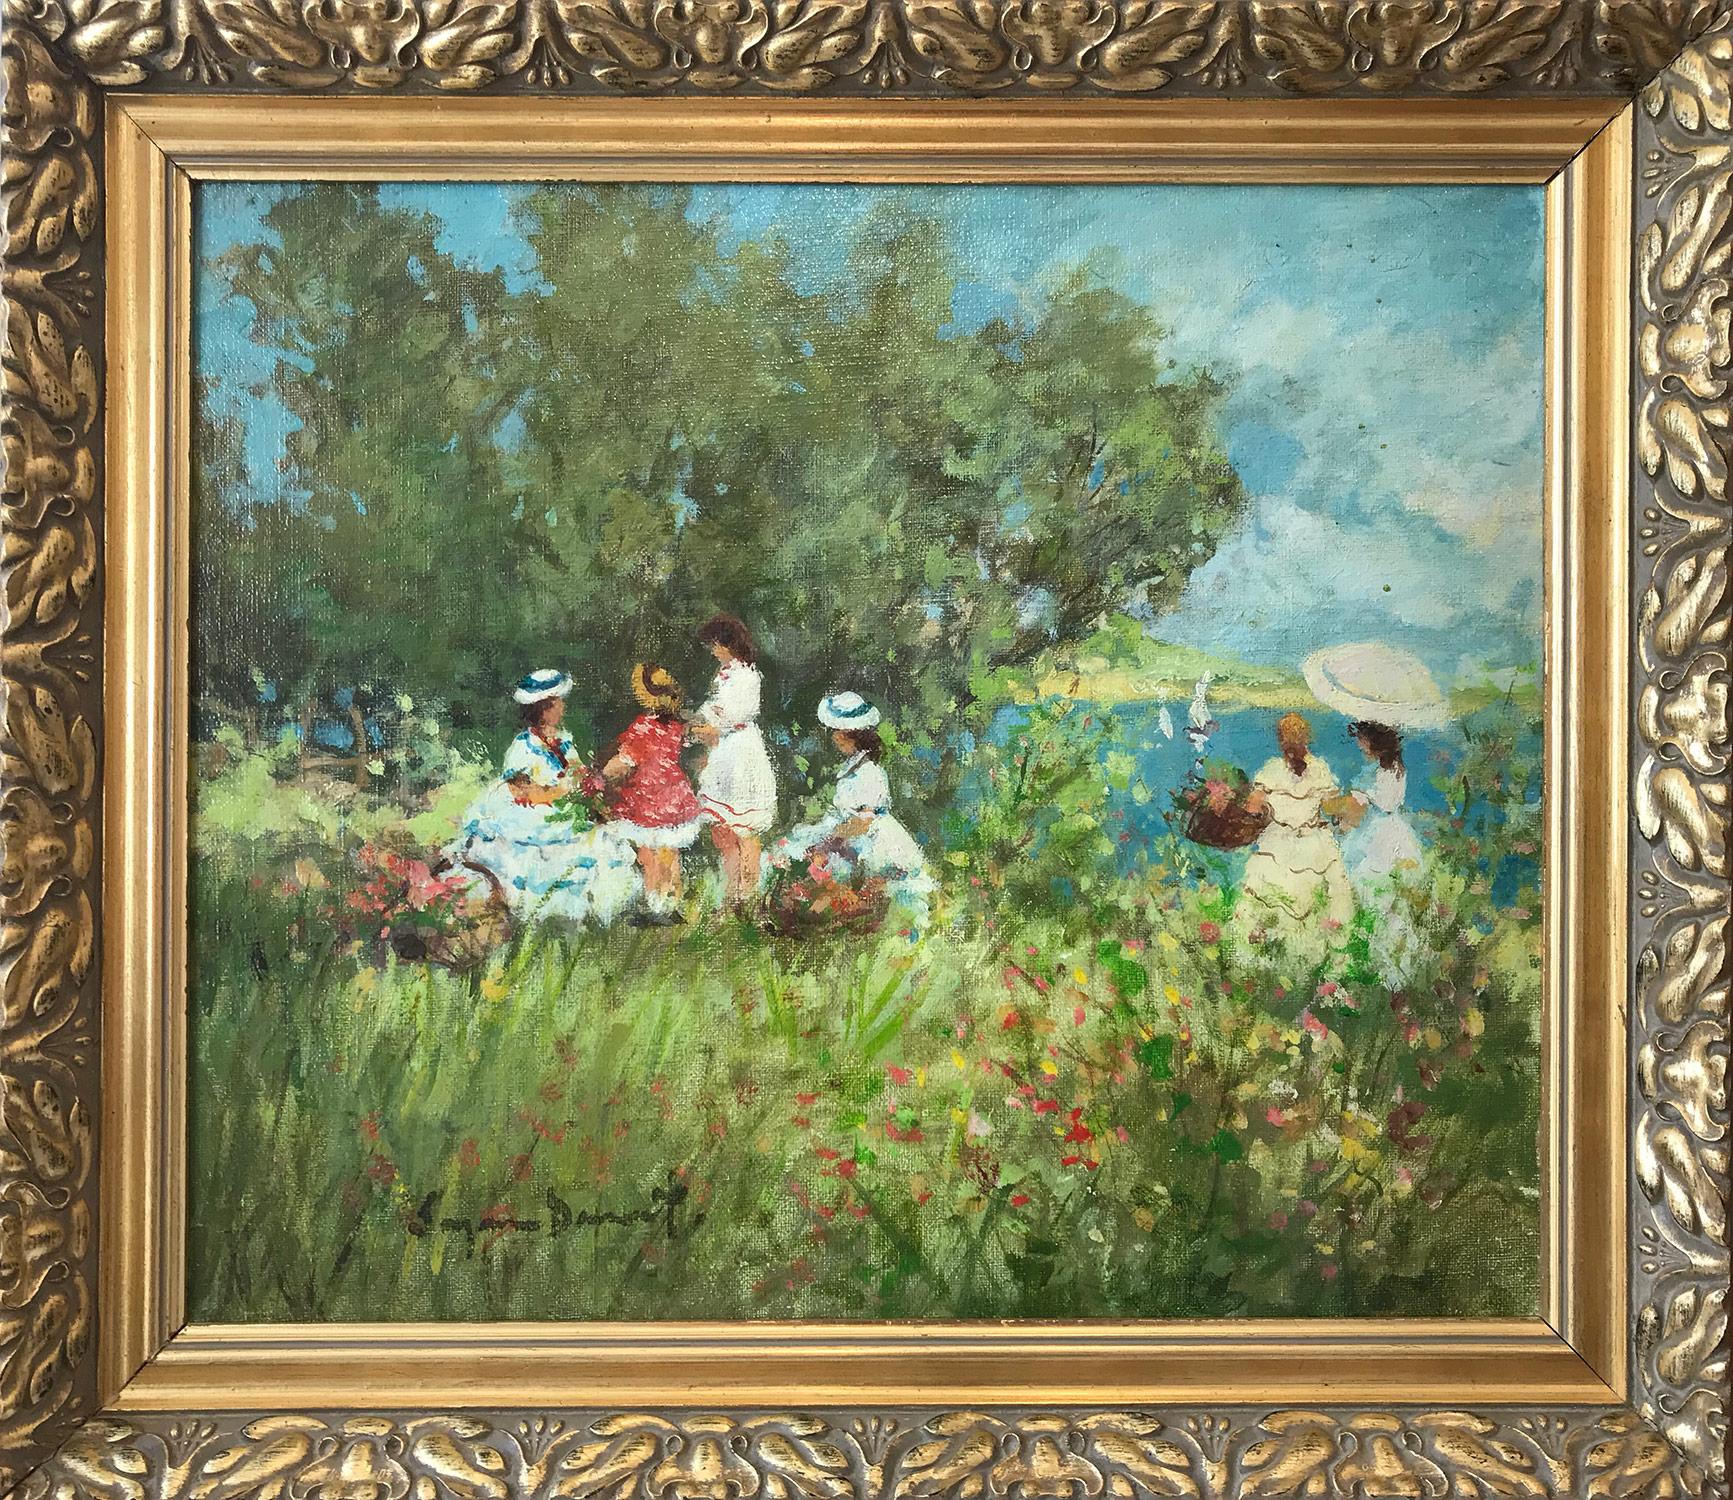 Suzanne Demarest  Landscape Painting - "Lakeside Picnic Scene with Figures" Impressionist French Oil Painting on Canvas